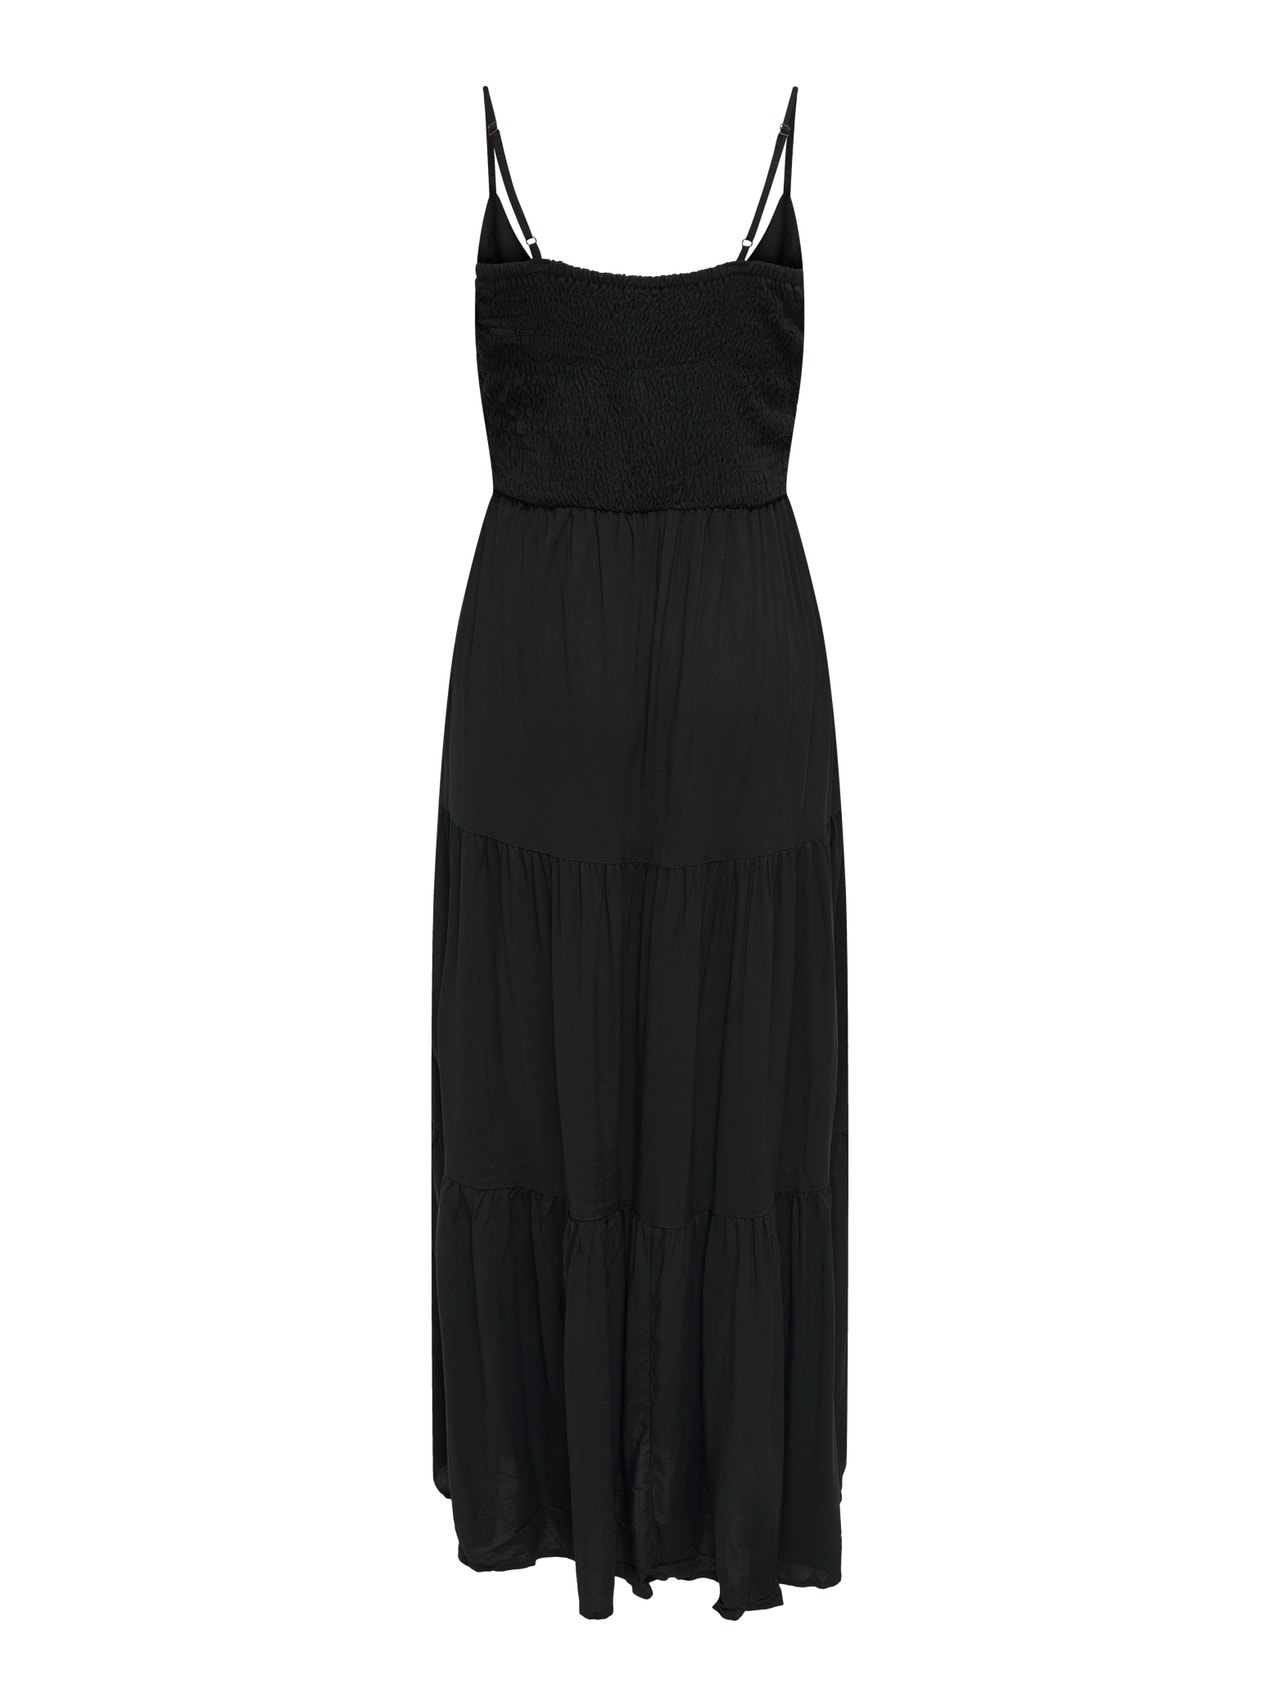 ONLY Maxi dress with frills -Black - 15342736